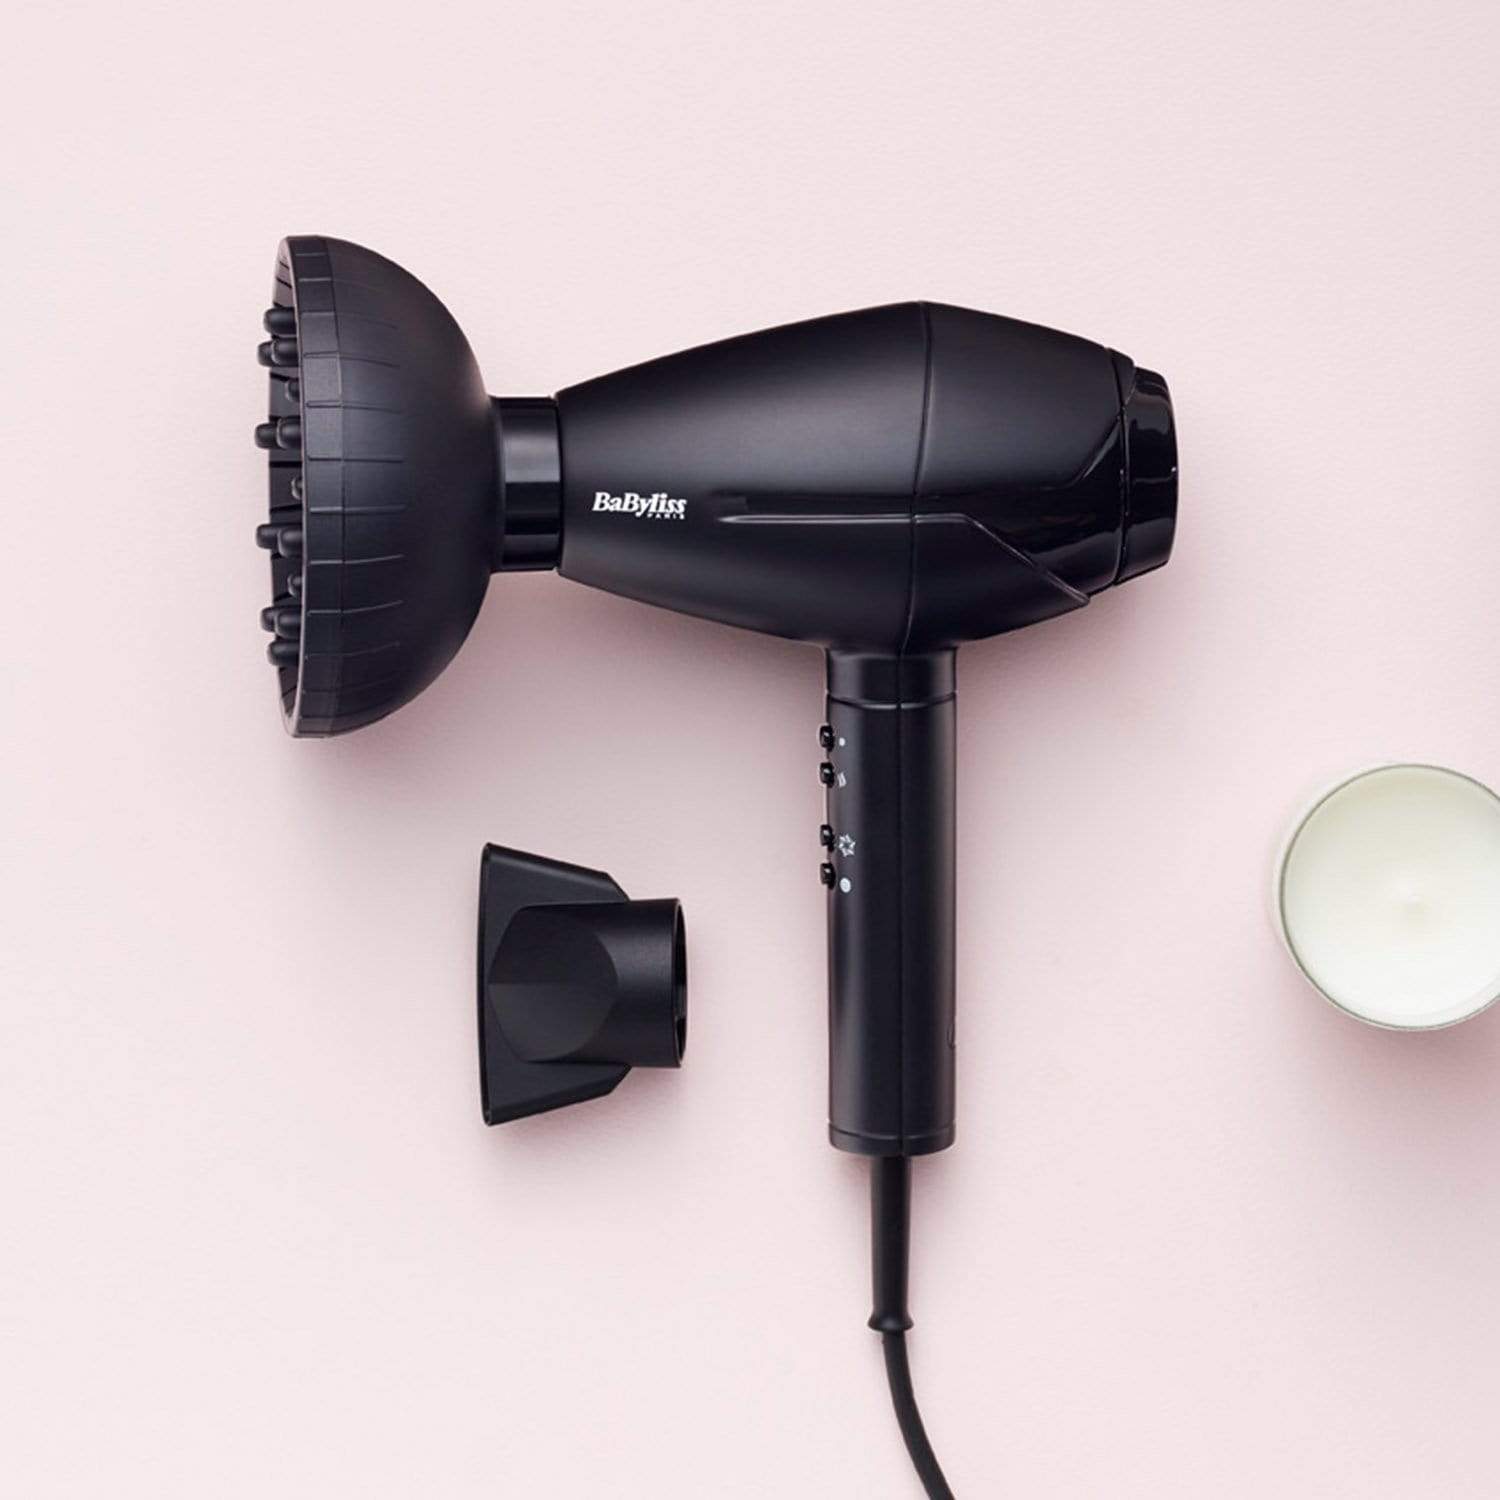 BaByliss Compact Dryer with Diffuser